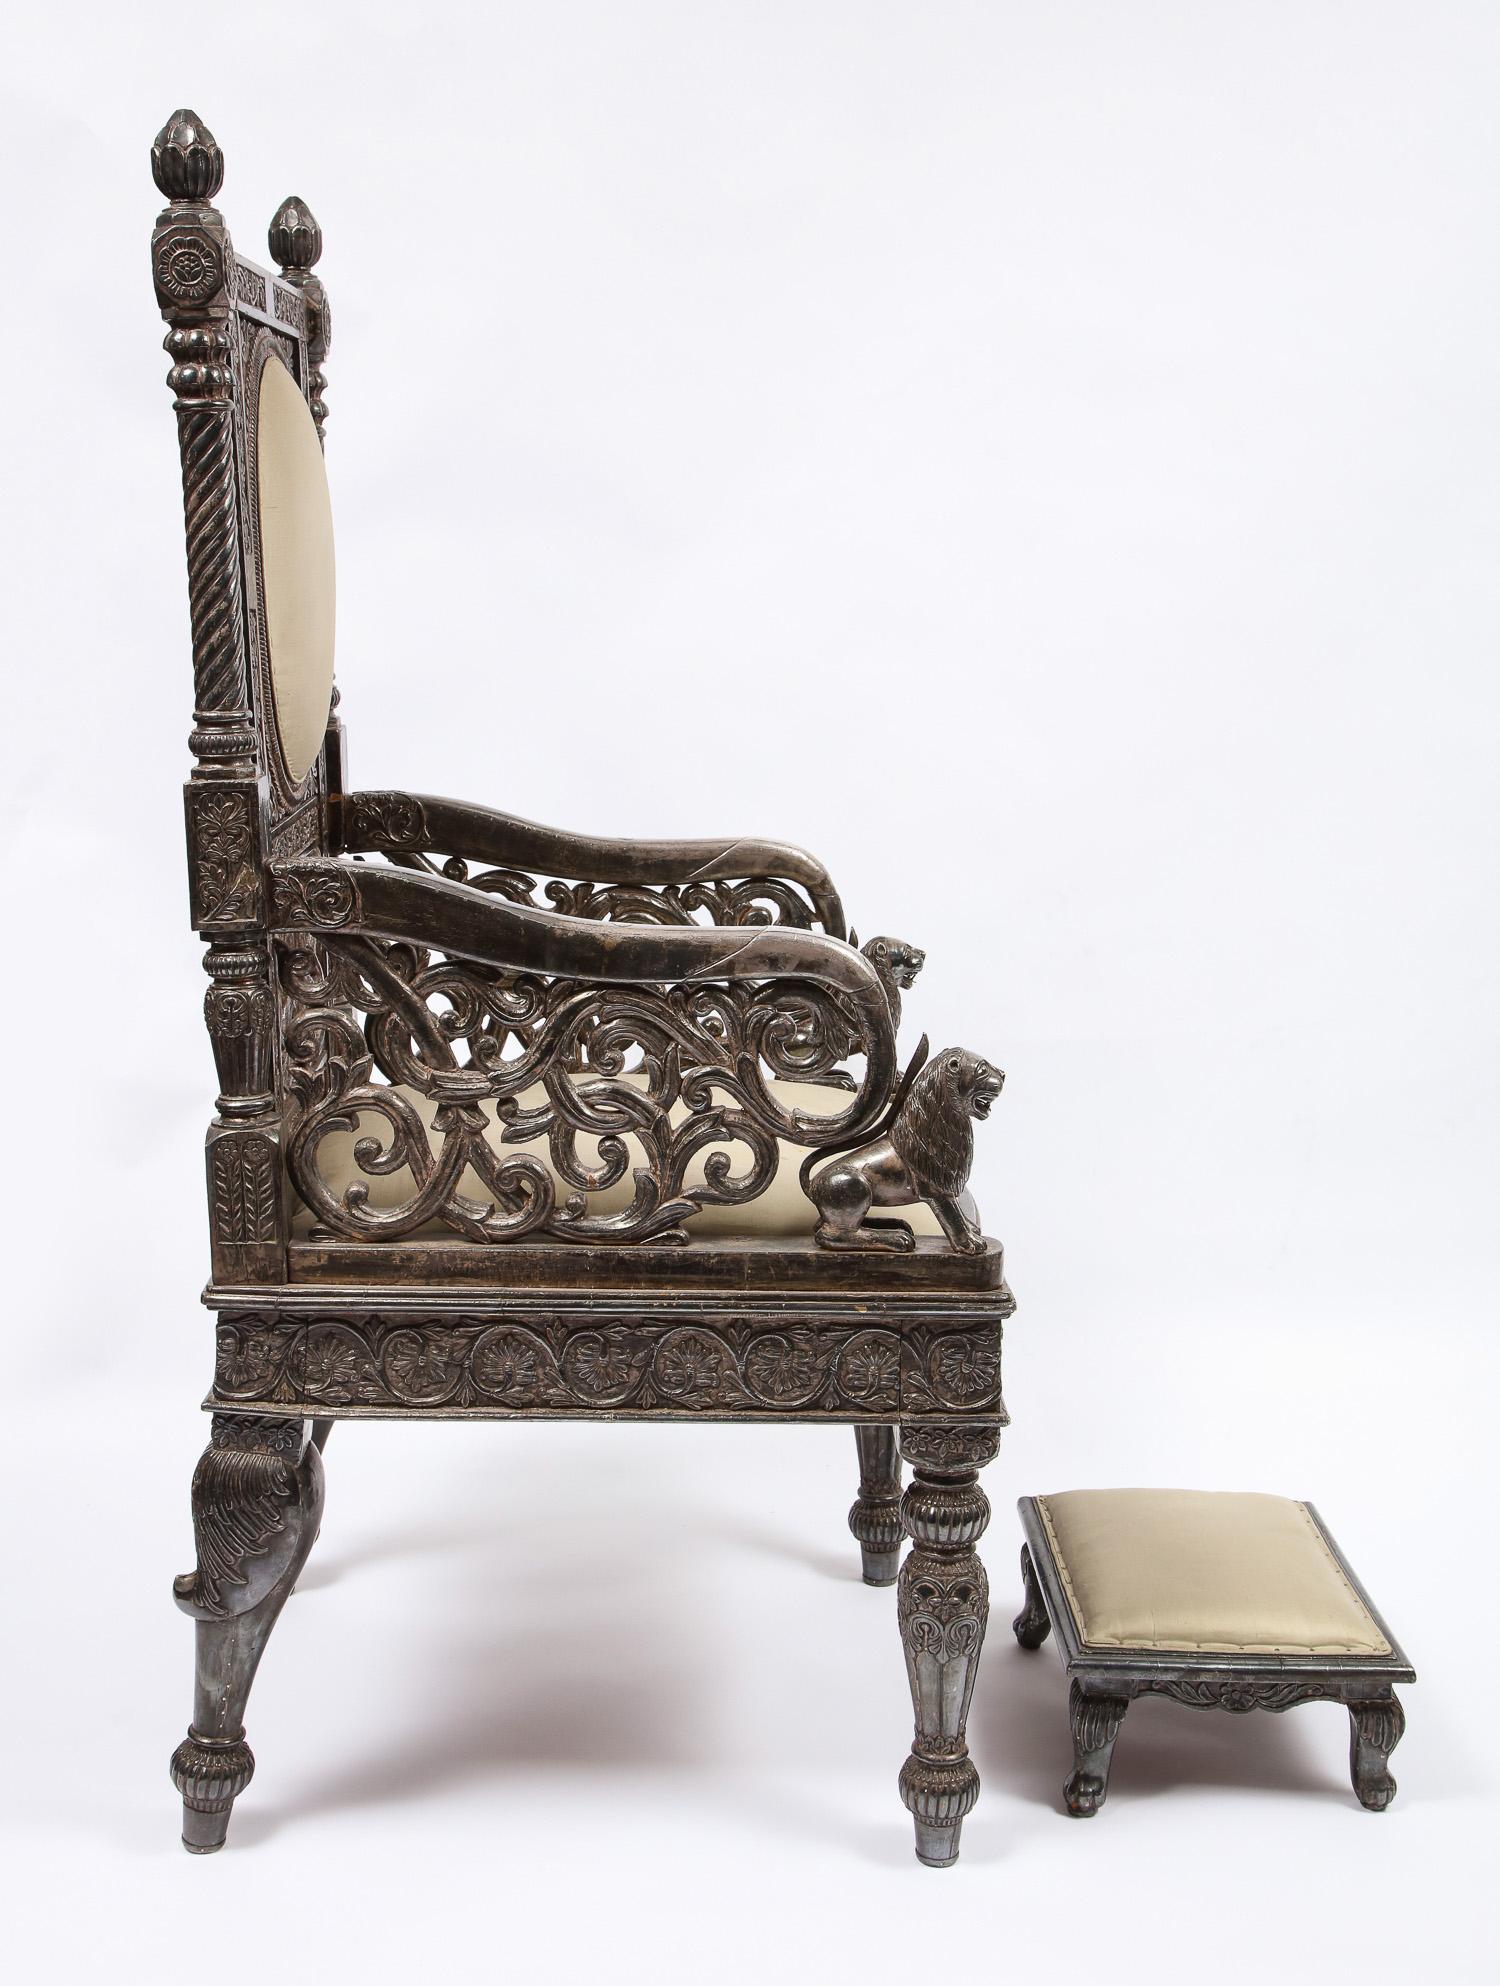 Indian Mogul Style Silver-Clad Gilded Ceremonial Throne Chair for the Maharajah For Sale 1